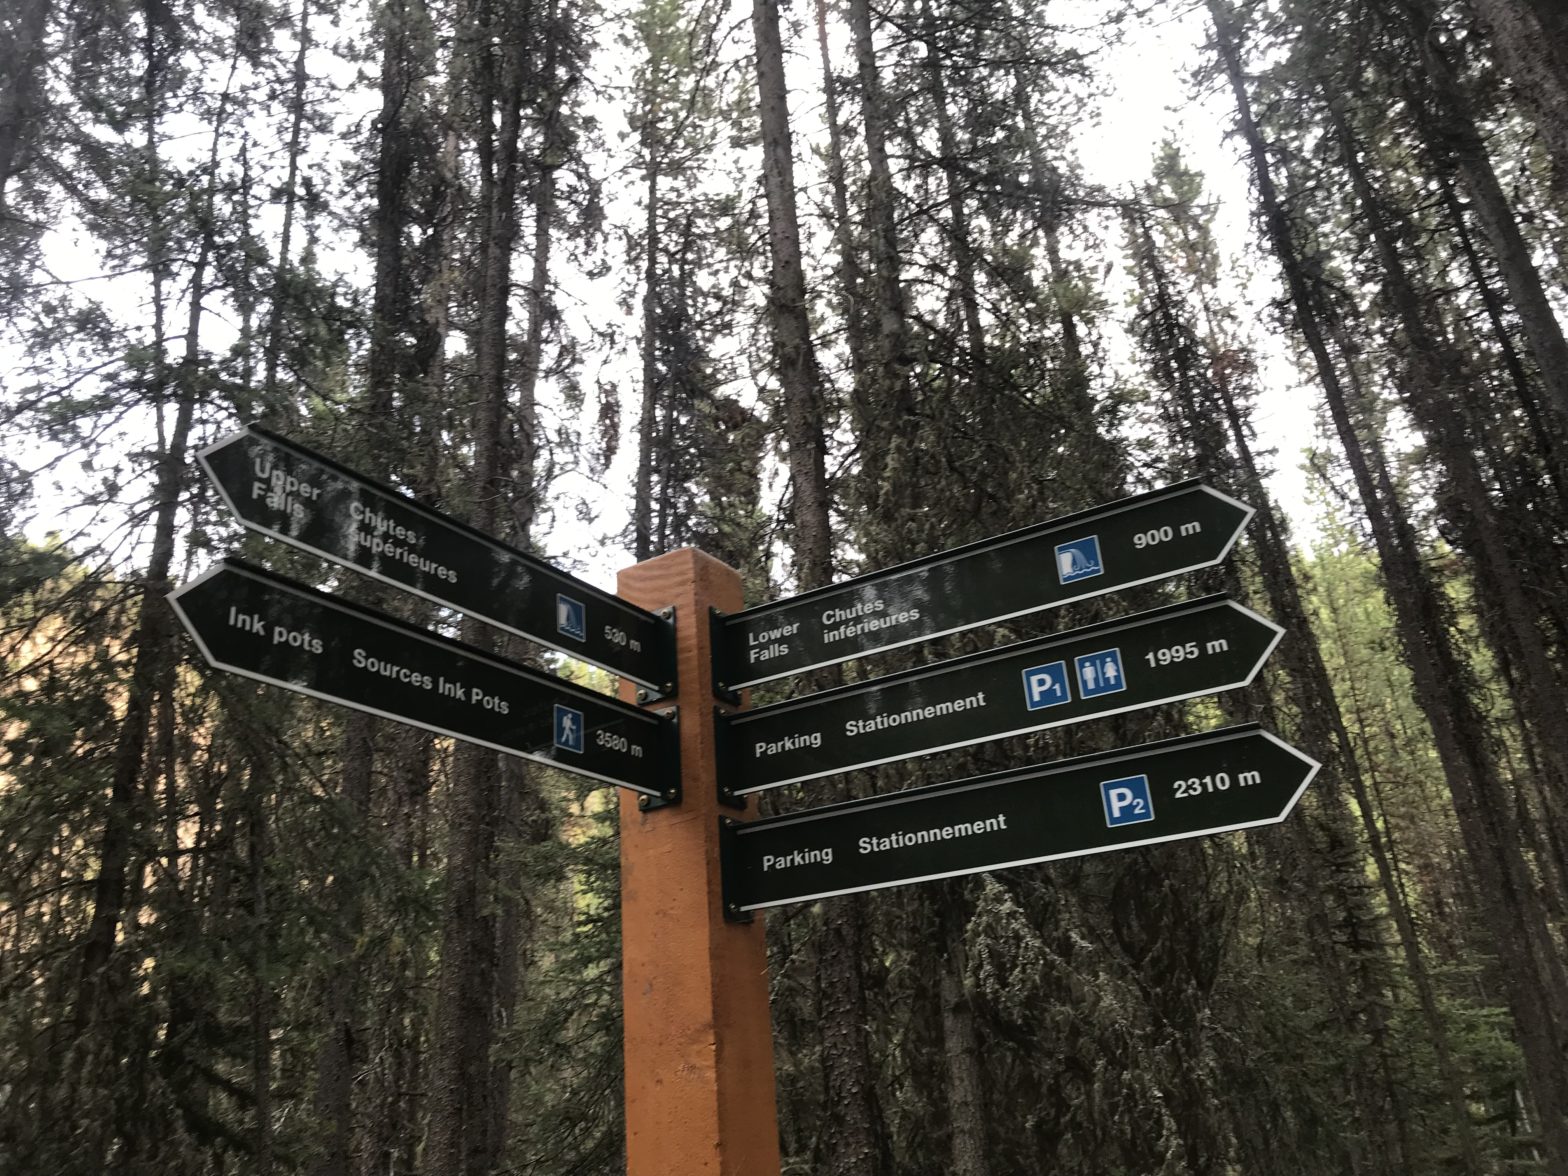 A photo of a trail sign from Banff, Alberta, Canada with two arrow-shaped signs pointing to the left and three to the right. Each arrow has the name of a trail in English and French (e.g. Lower Falls or Inkpots), with the distance in meters.